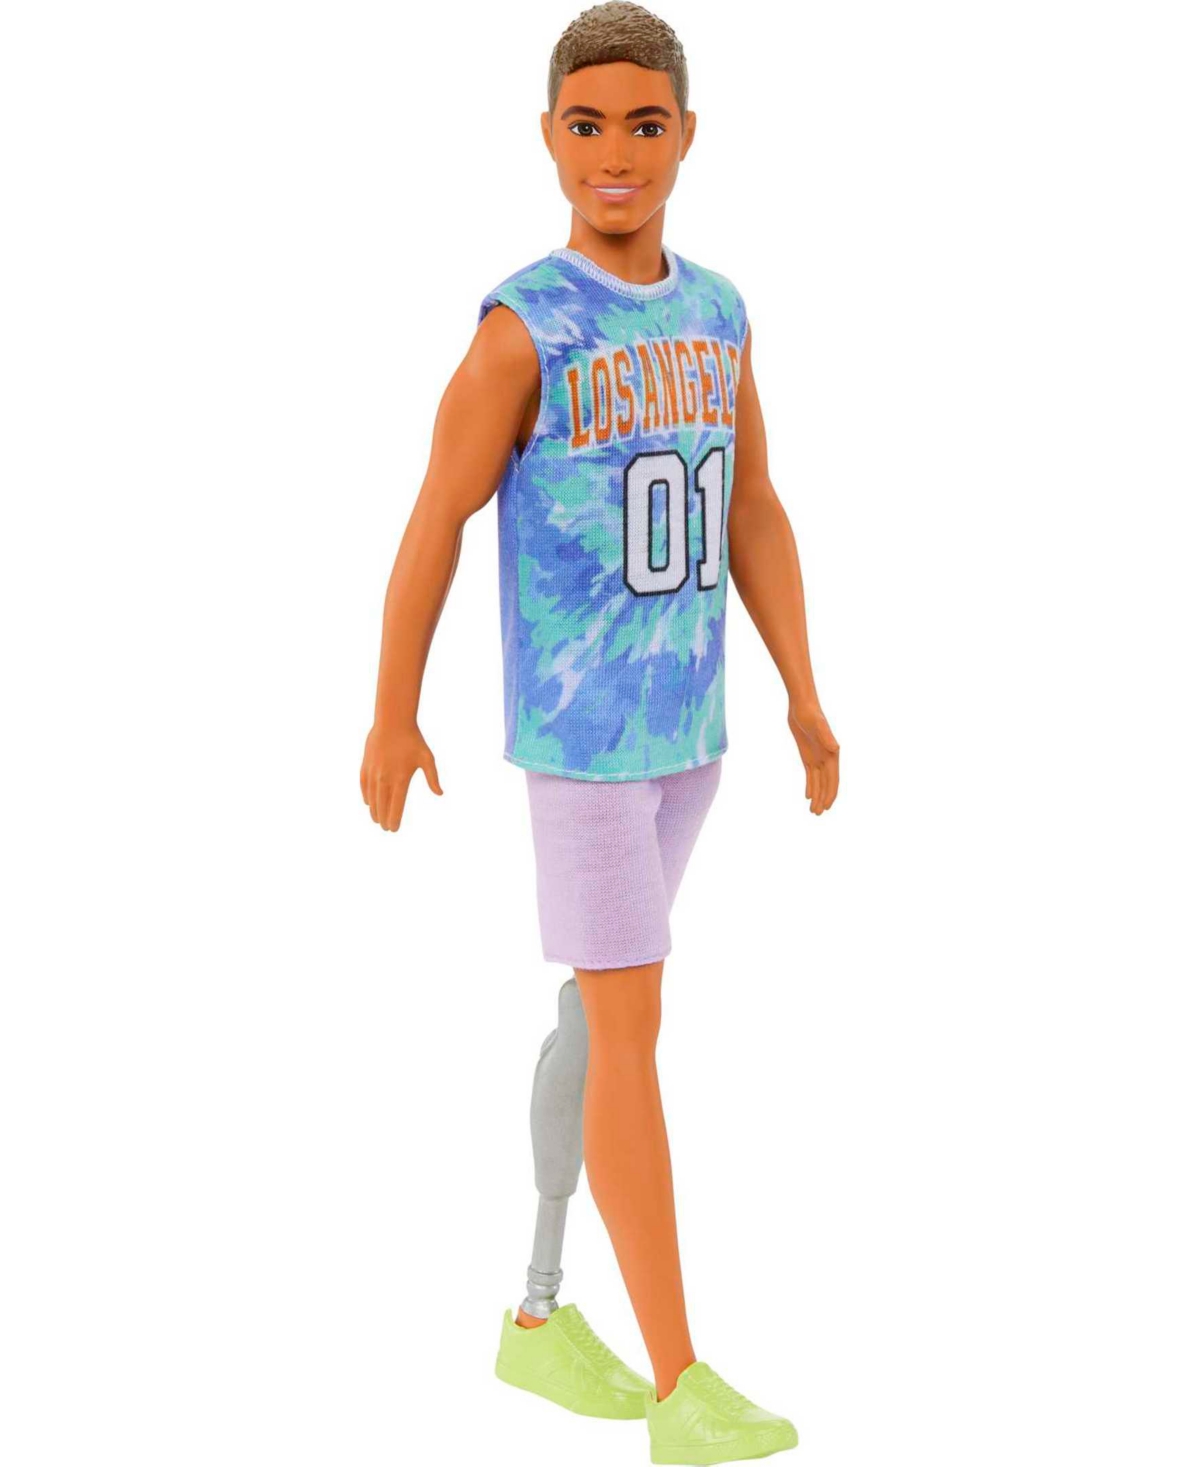 Shop Barbie Ken Fashionistas Doll 212 With Jersey And Prosthetic Leg In Multi-color